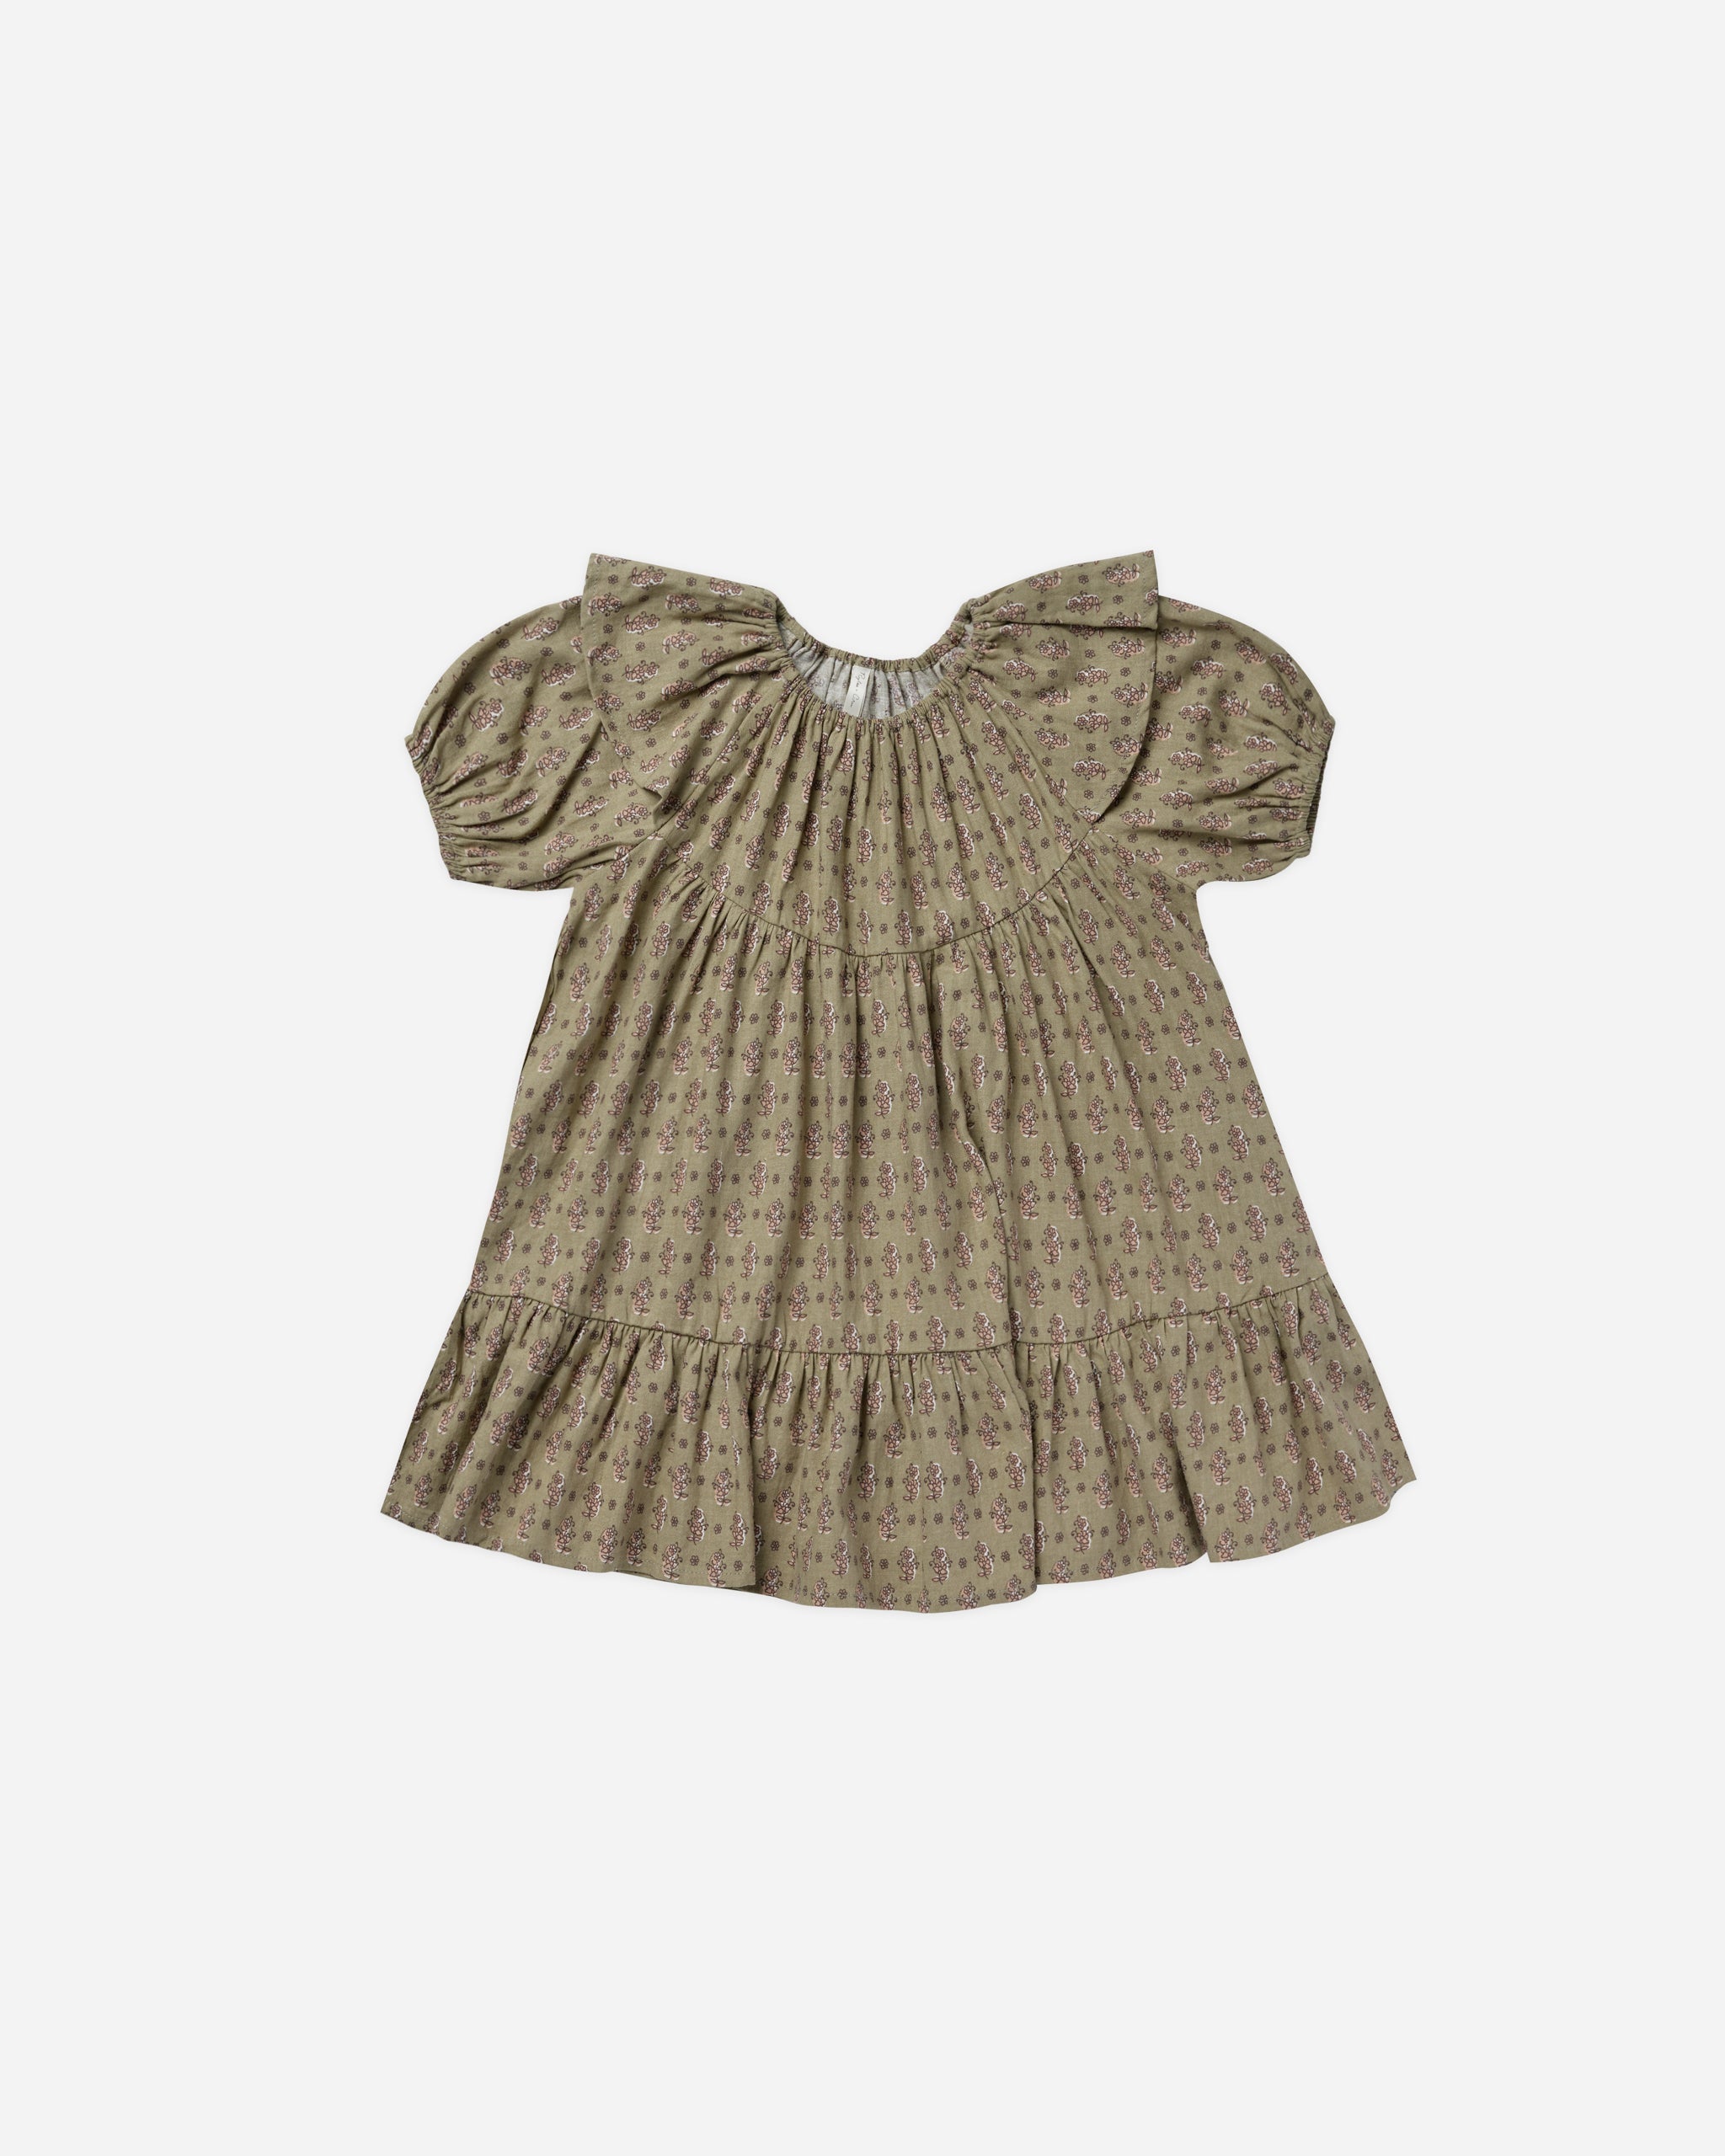 Willow Dress || Flower Block - Rylee + Cru | Kids Clothes | Trendy Baby Clothes | Modern Infant Outfits |